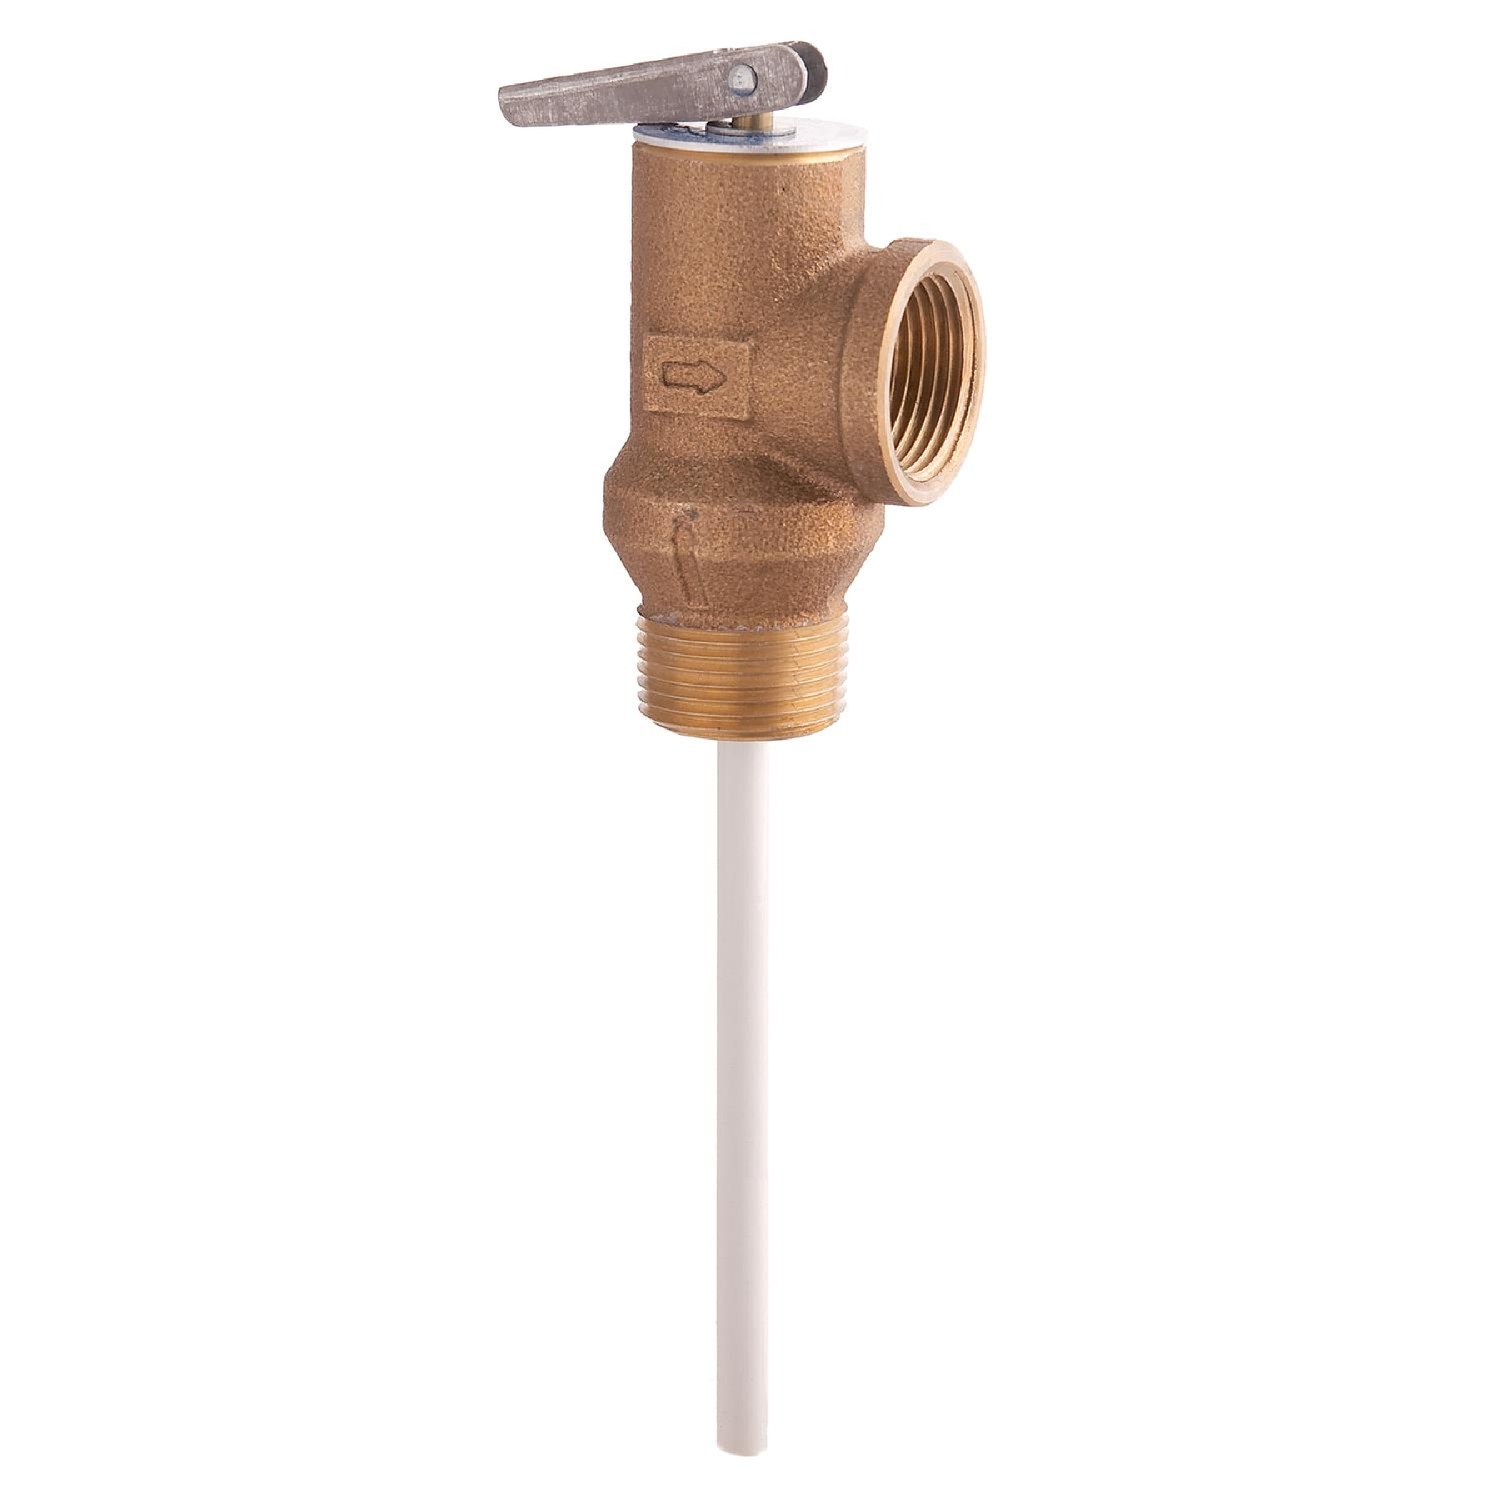 UPC 098268000023 product image for Watts Temperature and Pressure Relief Valve | upcitemdb.com